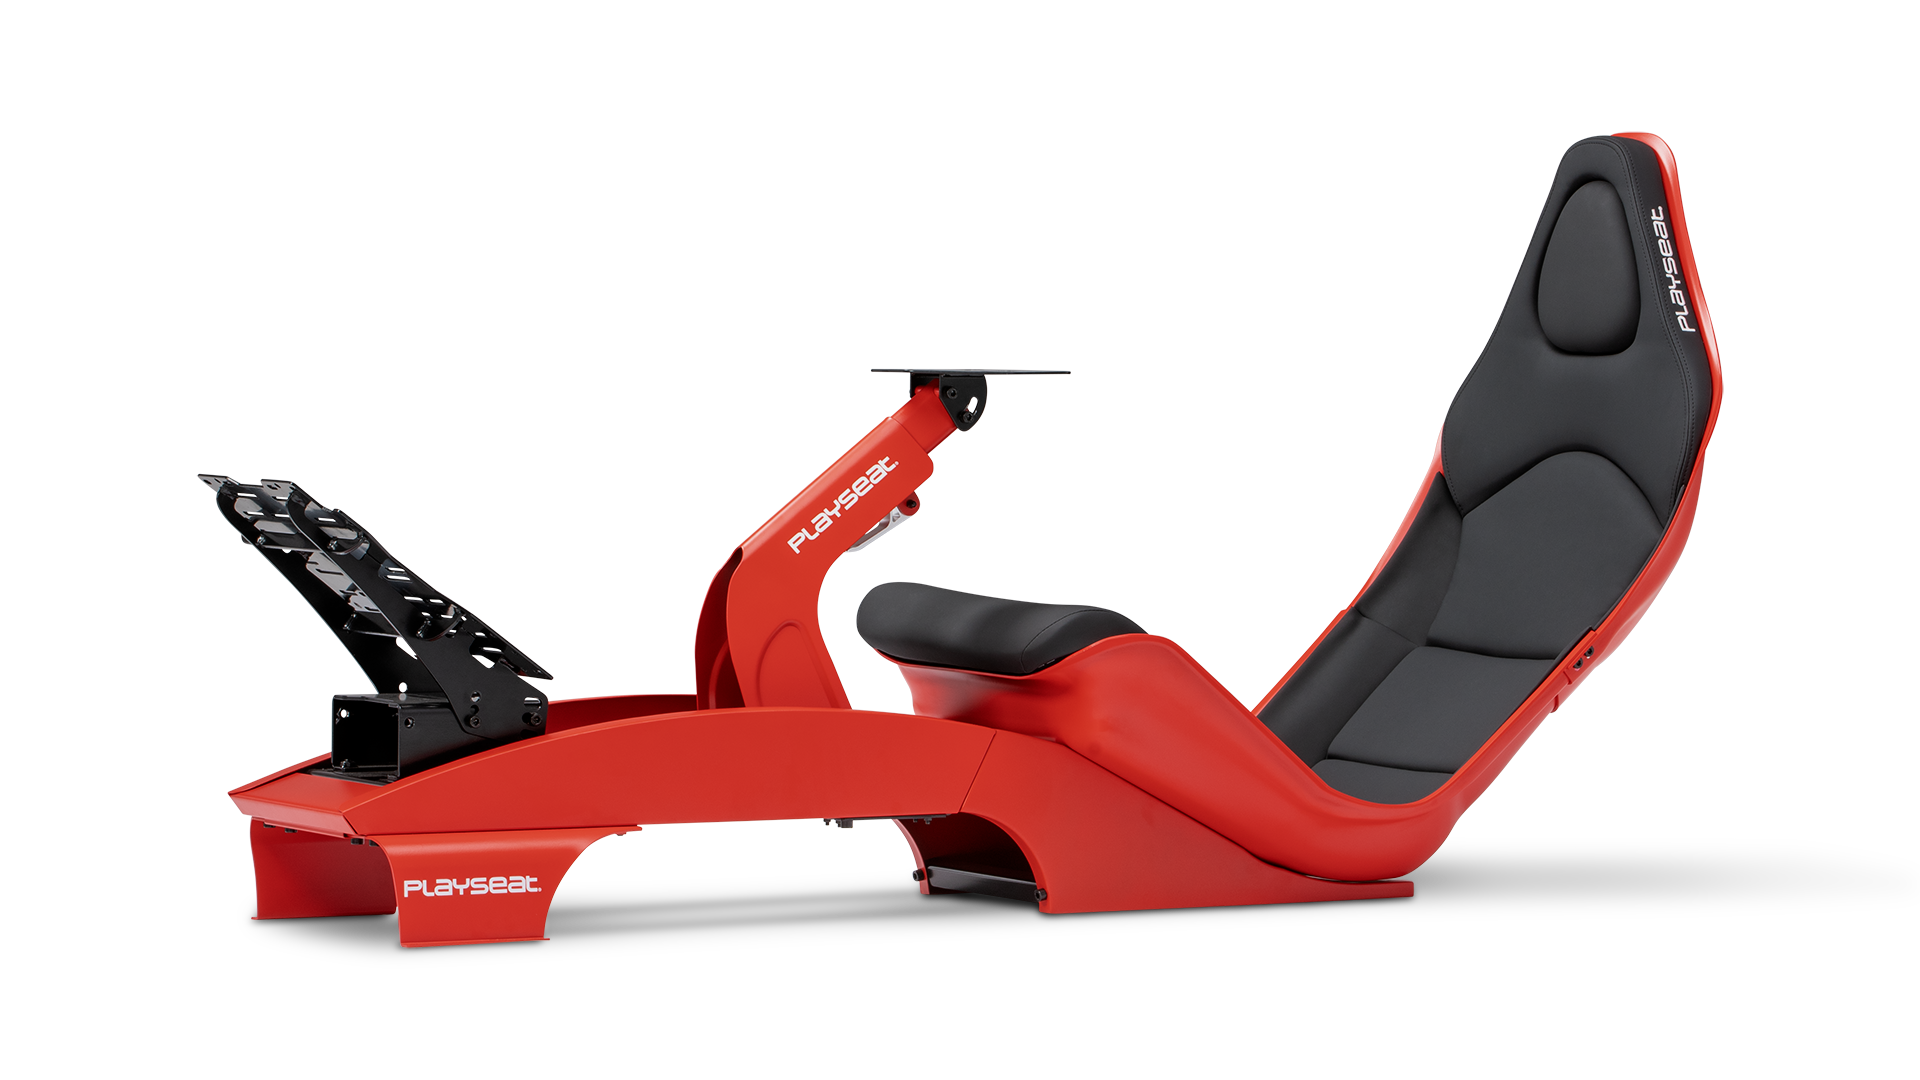 playseat-formula-red-f1-simulator-front-angle-view-1920x1080-7.png